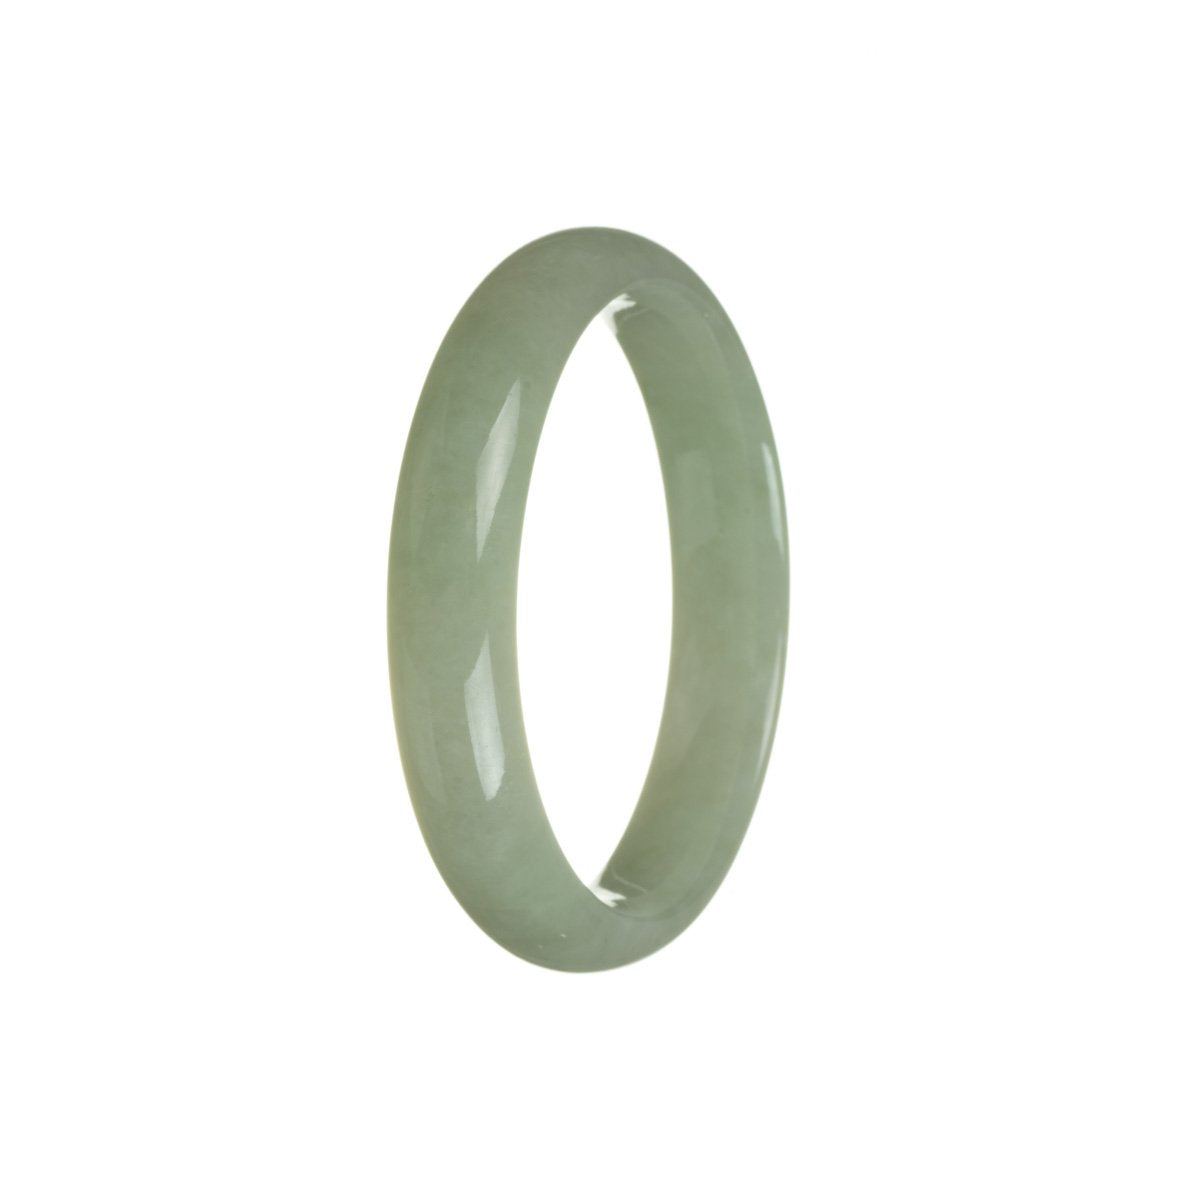 A close-up photo of a beautiful green Burmese jade bracelet with a half moon shape, measuring 57mm in size. The bracelet is made of genuine Grade A jade and shines with natural beauty.